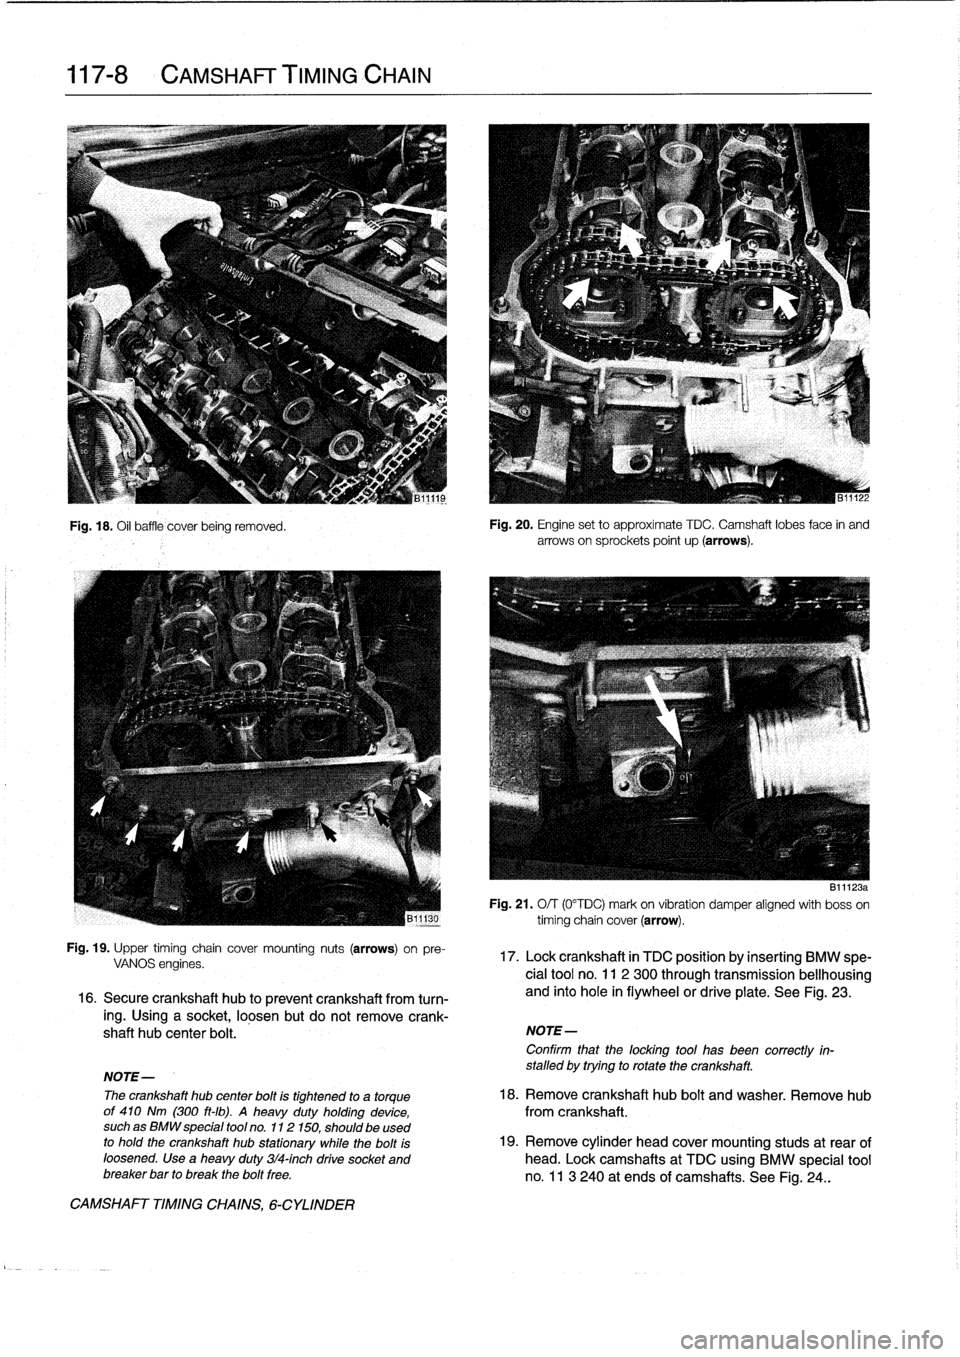 BMW 325i 1998 E36 Workshop Manual 
117-
8

	

CAMSHAFT
TIMING
CHAIN

Fig
.
18
.
Oil
baffle
cover
being
removed
.

Fig
.
19
.
Upper
timing
chaincover
mounting
nuts
(arrows)
on
pre-
VANOS
engines
.

16
.
Secure
crankshaft
hub
to
preven